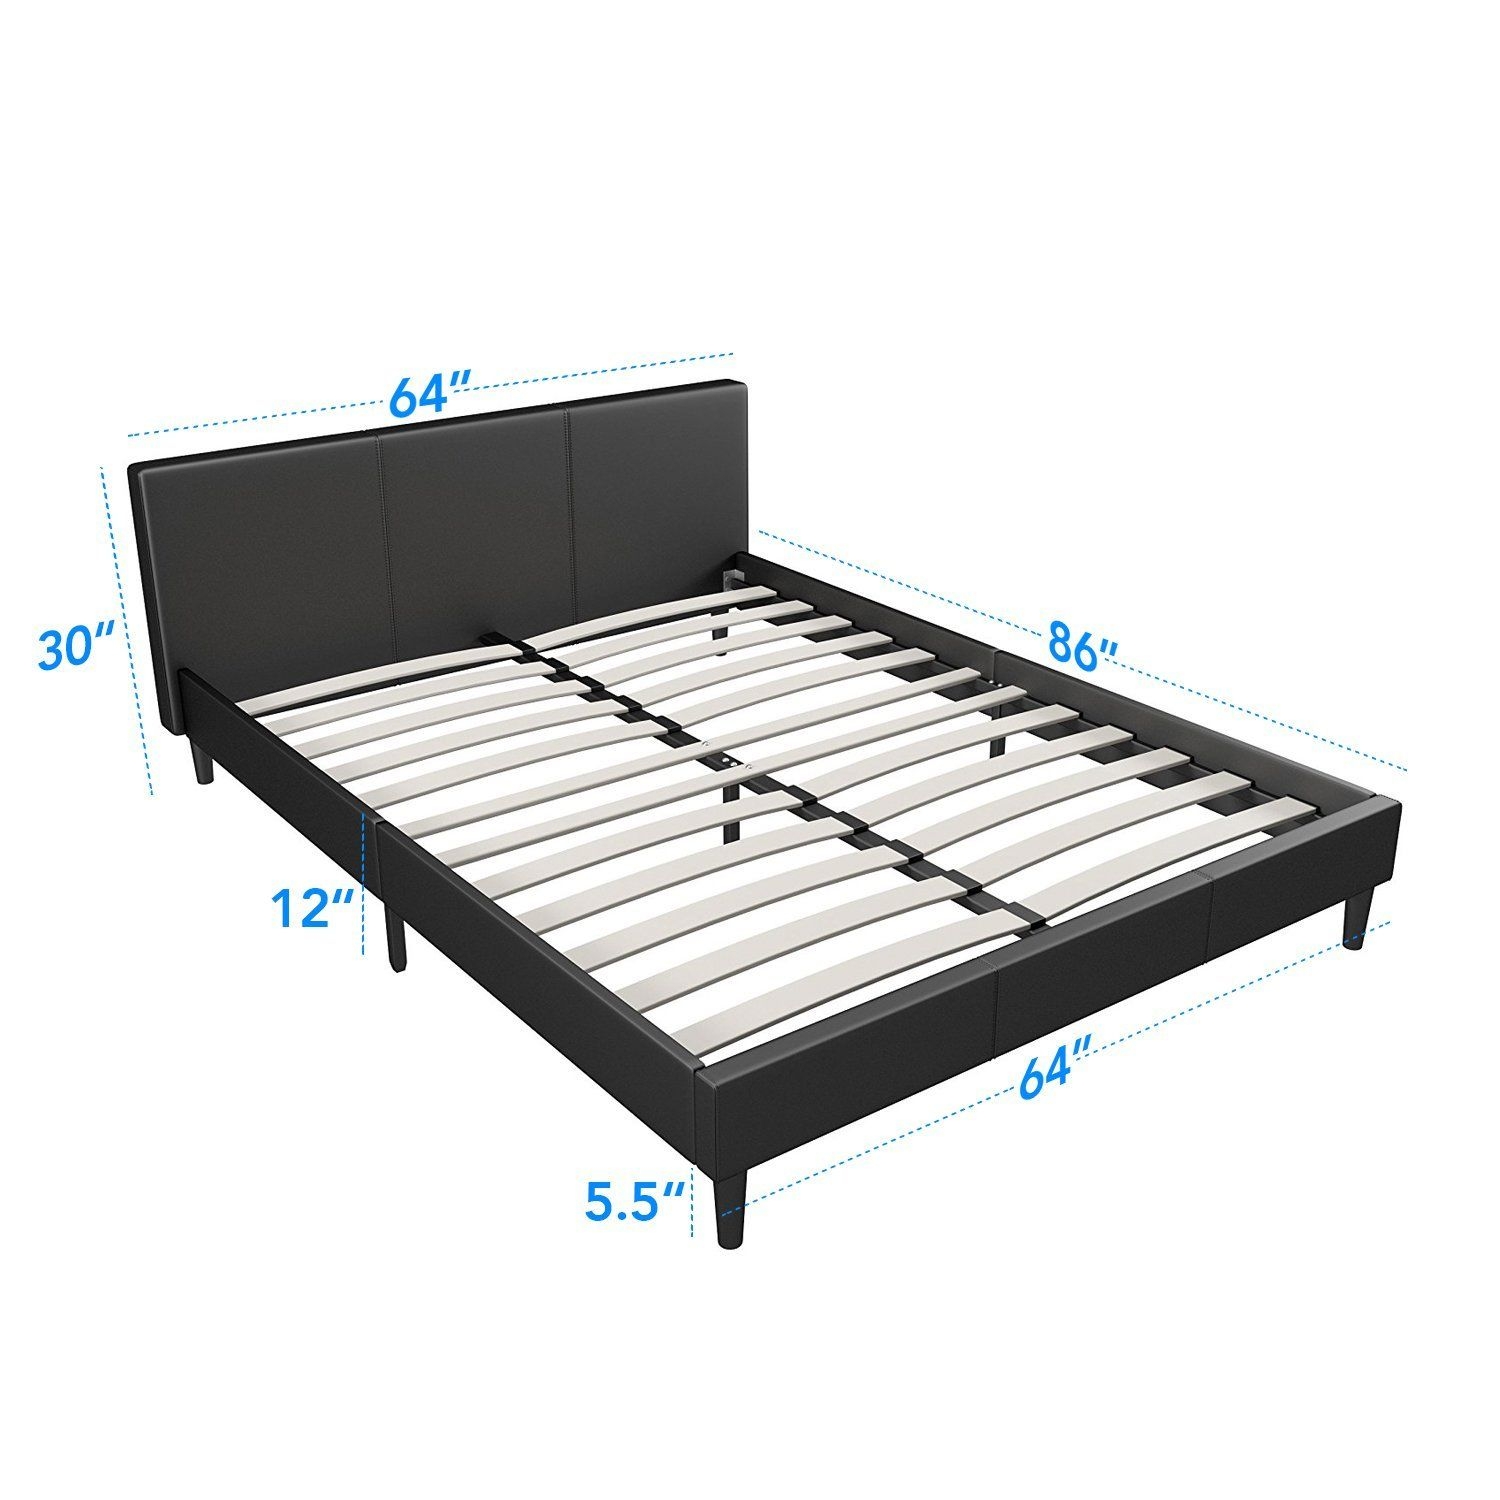 Low Profile Queen Bed Frames Visualhunt, Low Profile Queen Size Metal Bed Frame